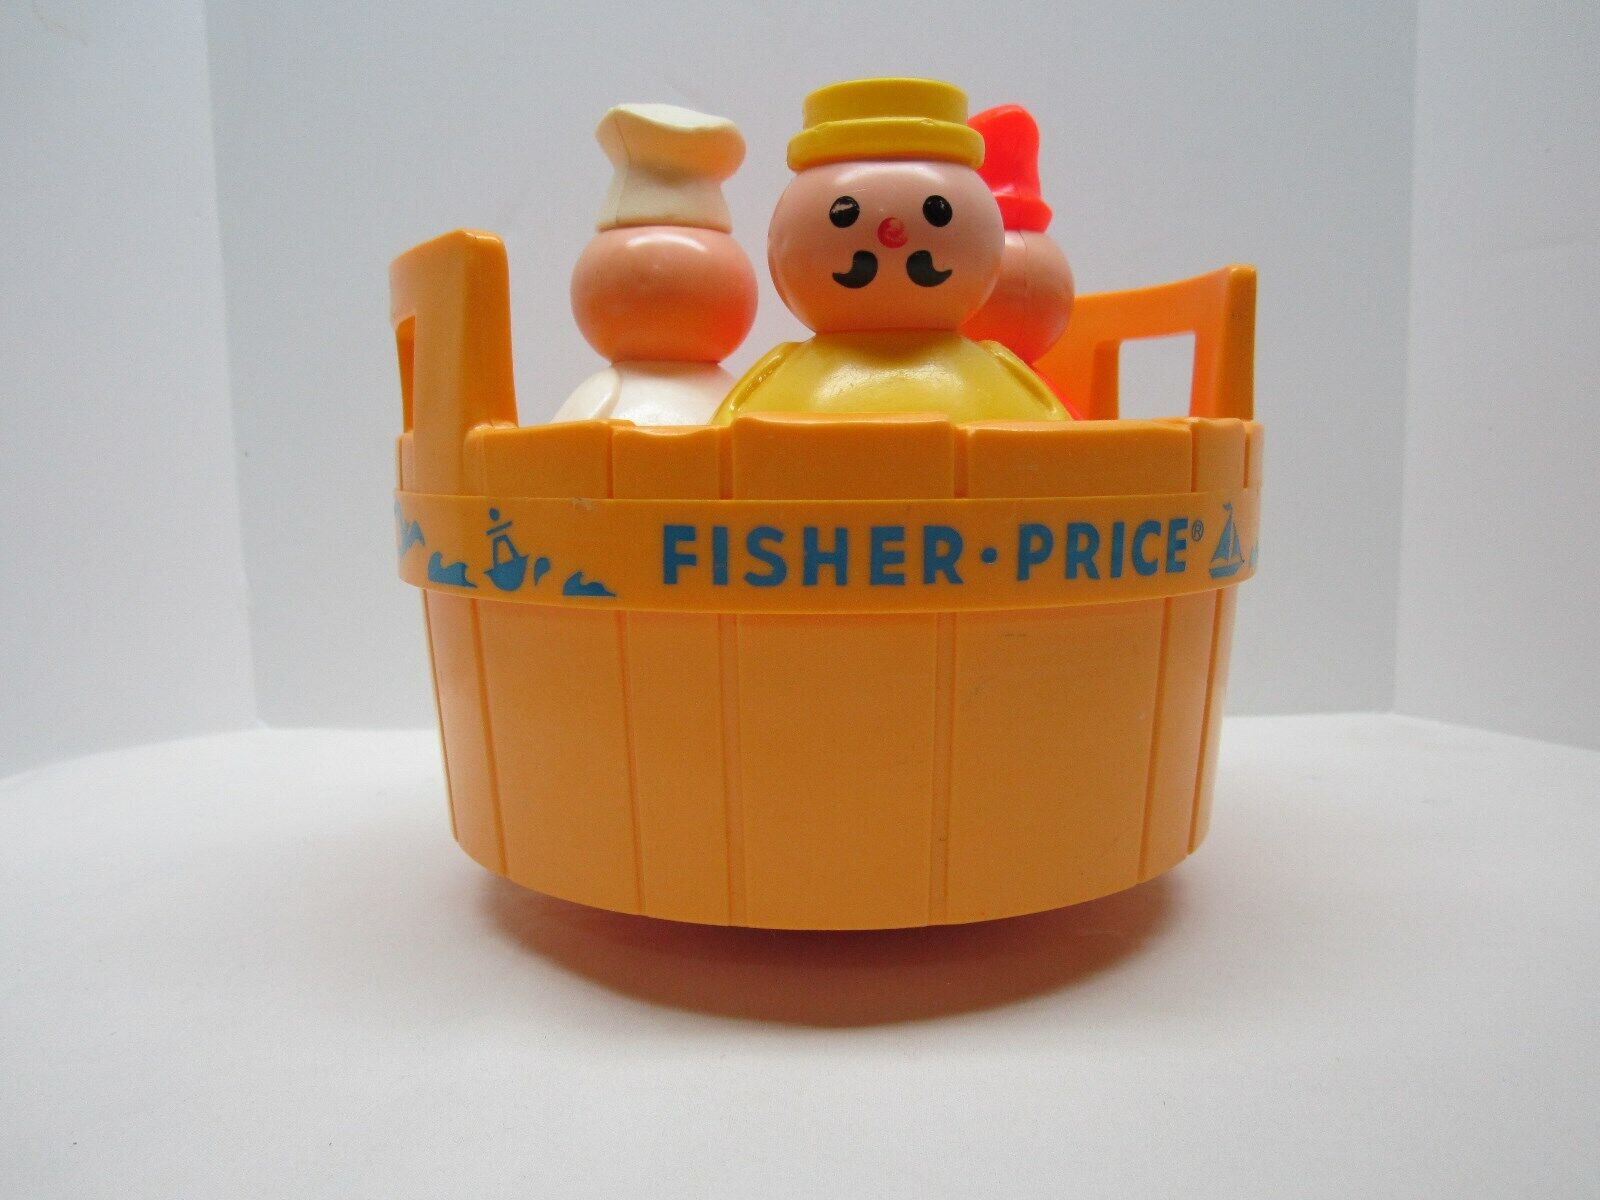 Low price Vintage Max 56% OFF Fisher Price Three Men in Toy Tub a Bath